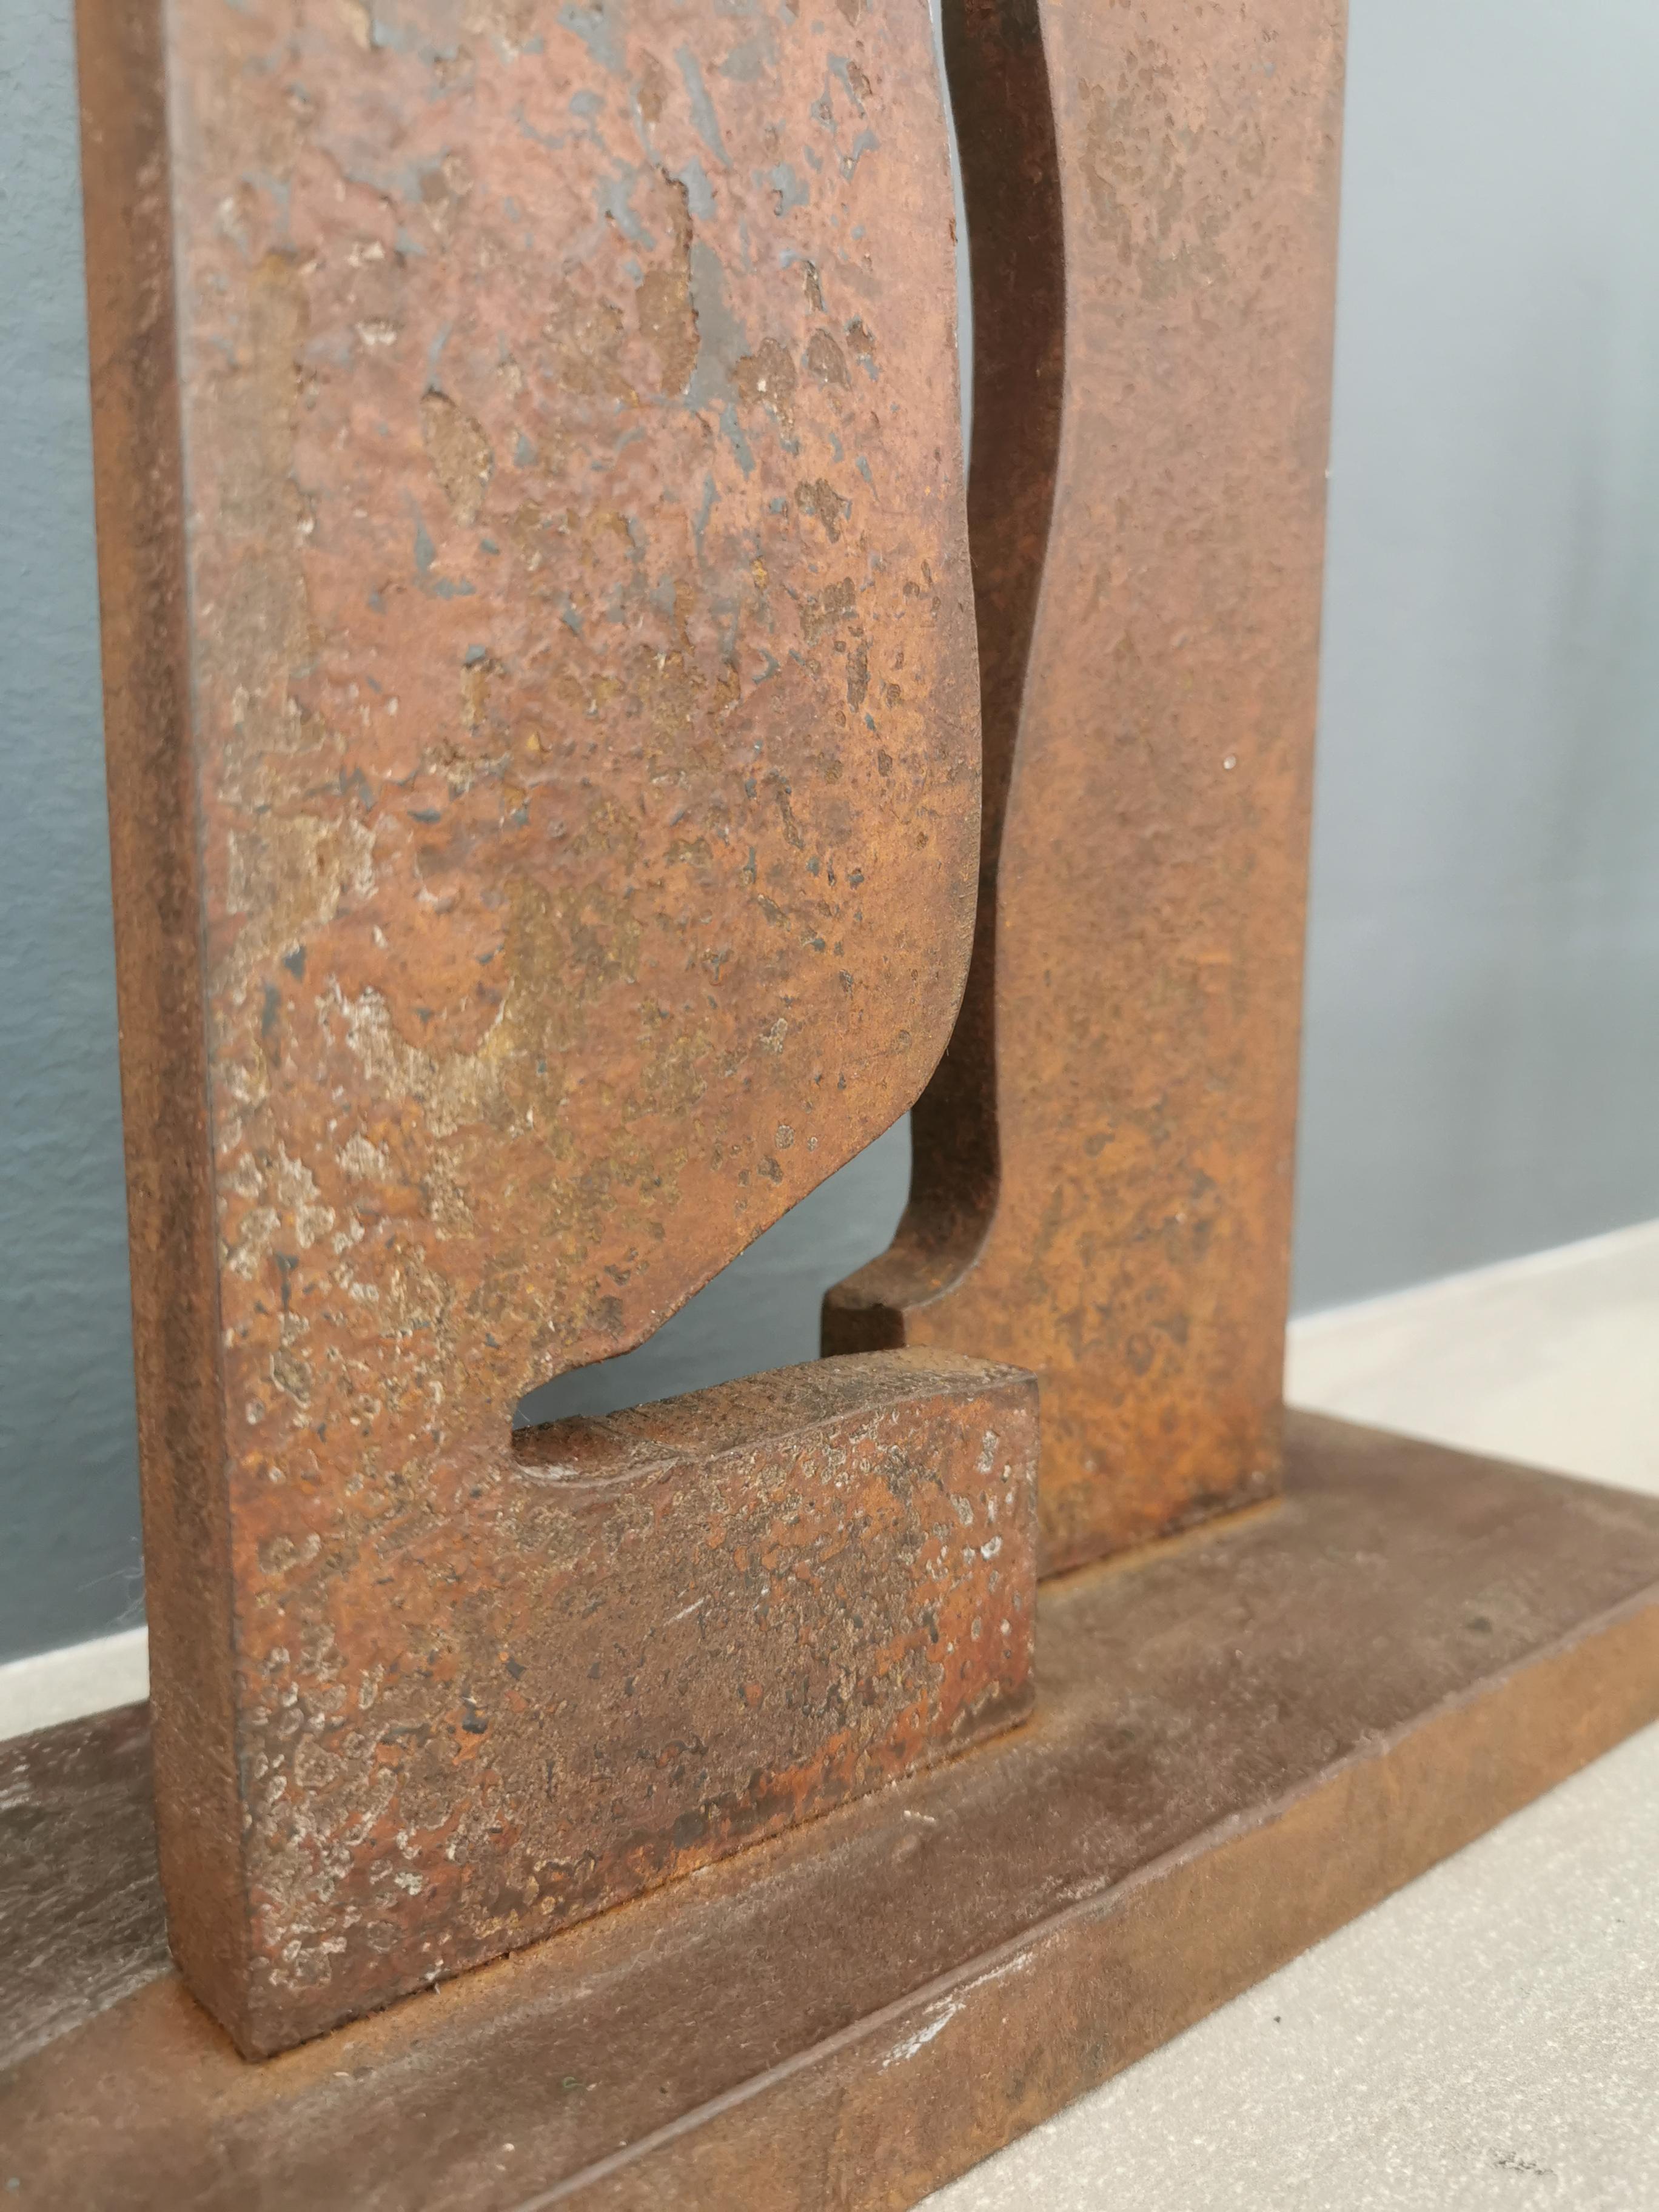 Limited Edition Medium Sized Rusted Steel Sculpture 